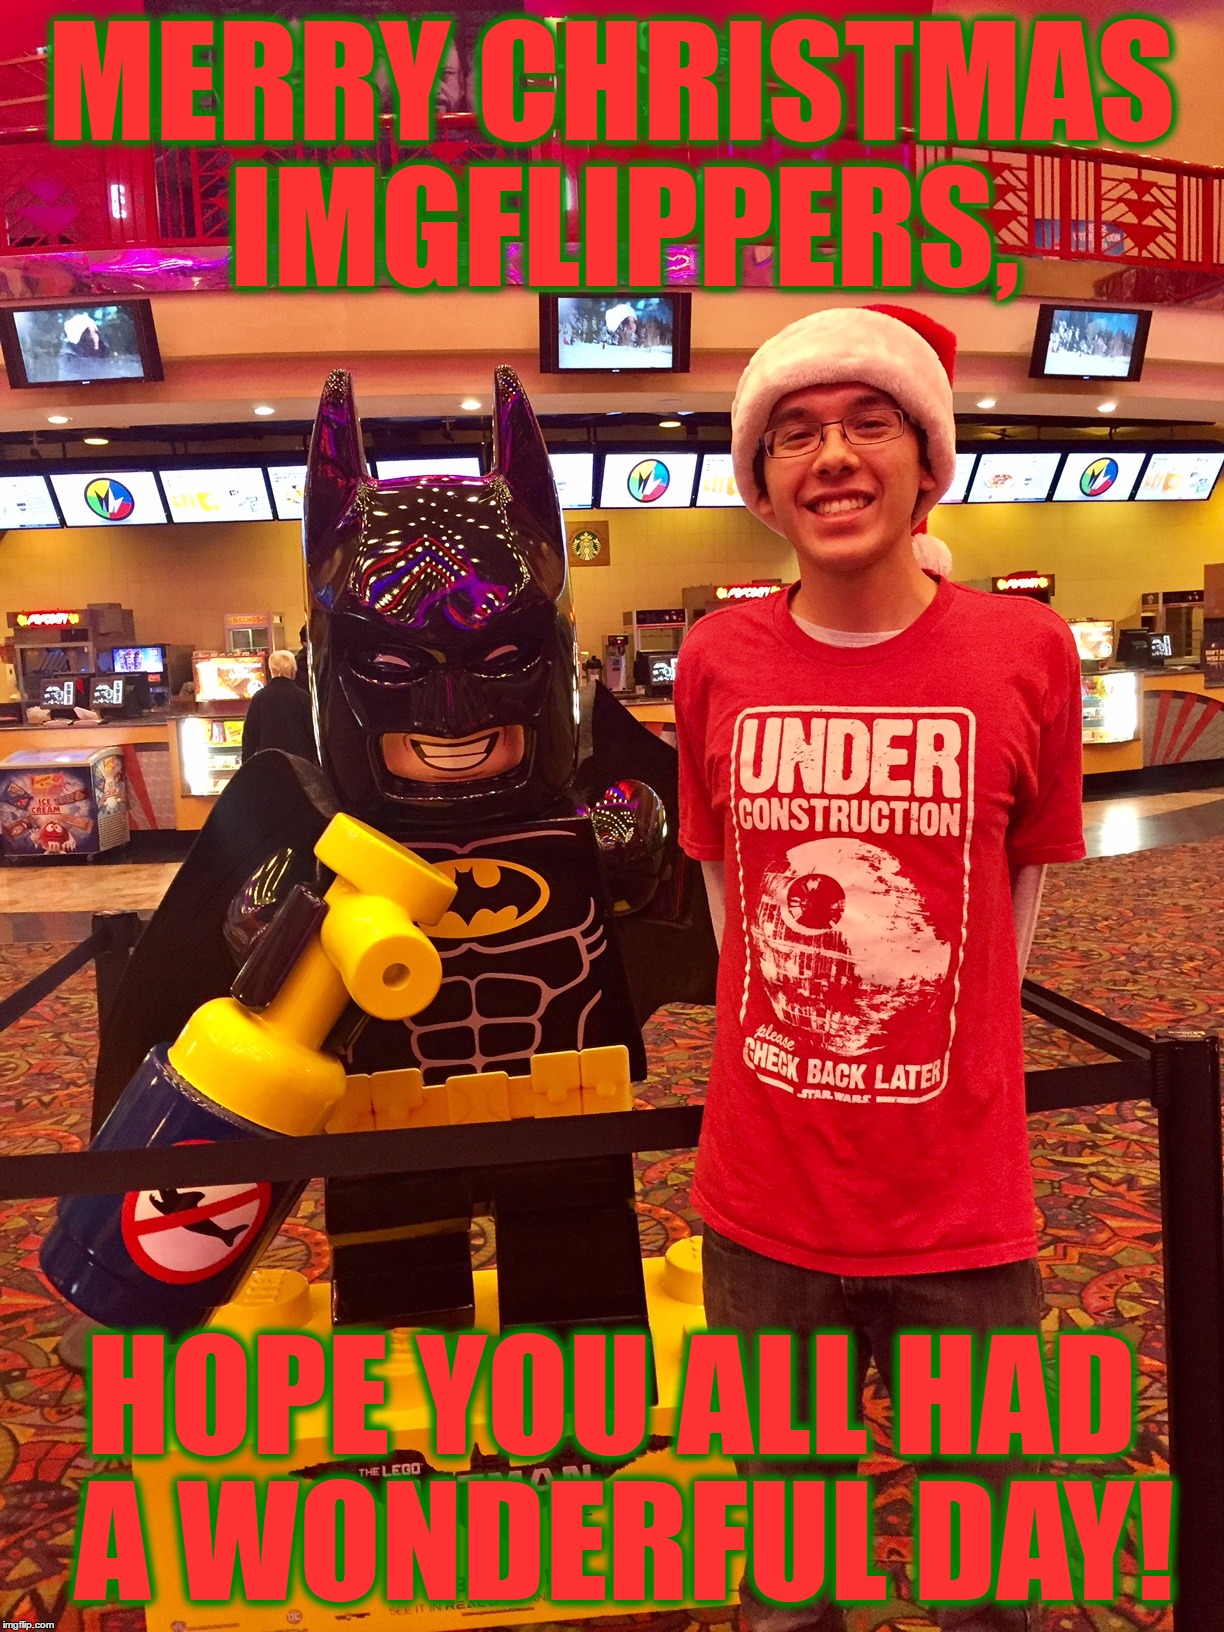 Well It's Christmas, And What Better Way To Celebrate It With A Recent Picture Of Me, My Gift To You. | MERRY CHRISTMAS IMGFLIPPERS, HOPE YOU ALL HAD A WONDERFUL DAY! | image tagged in memes,lego batman,merry christmas,juicydeath1025,imgflippers,rogue one | made w/ Imgflip meme maker